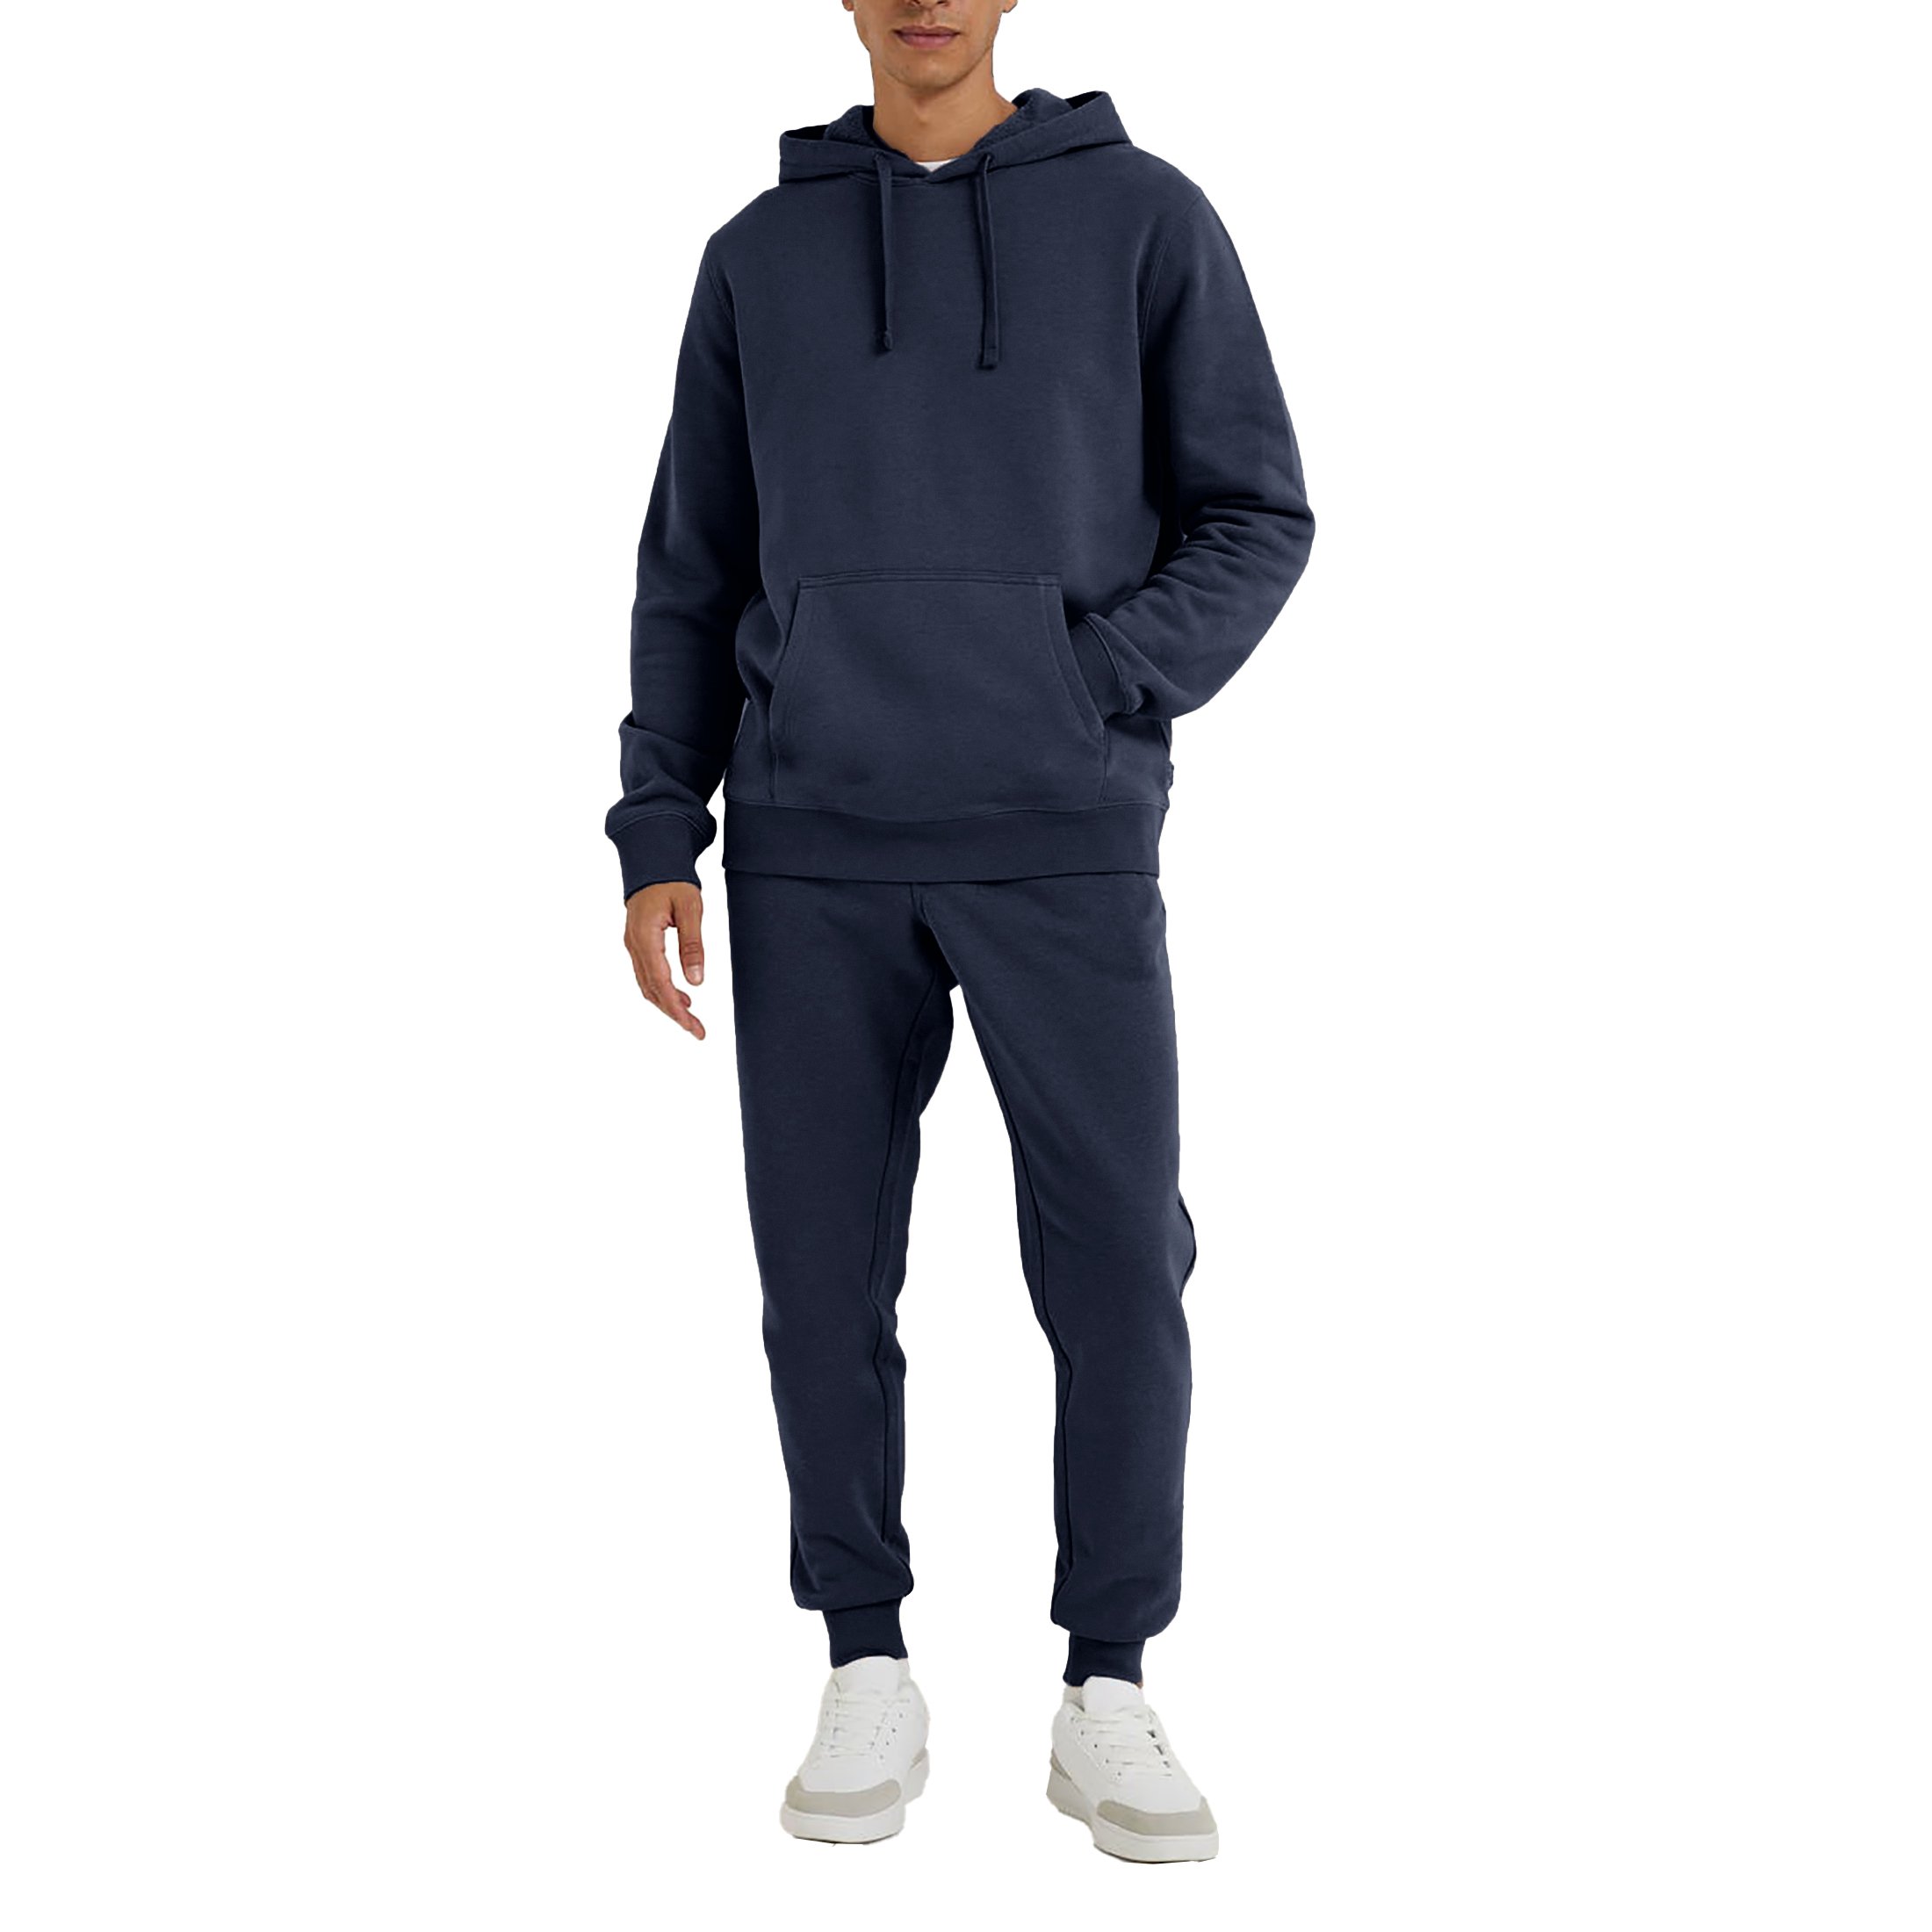 Men's Athletic Warm Jogging Pullover Active Tracksuit - Navy, X-Large